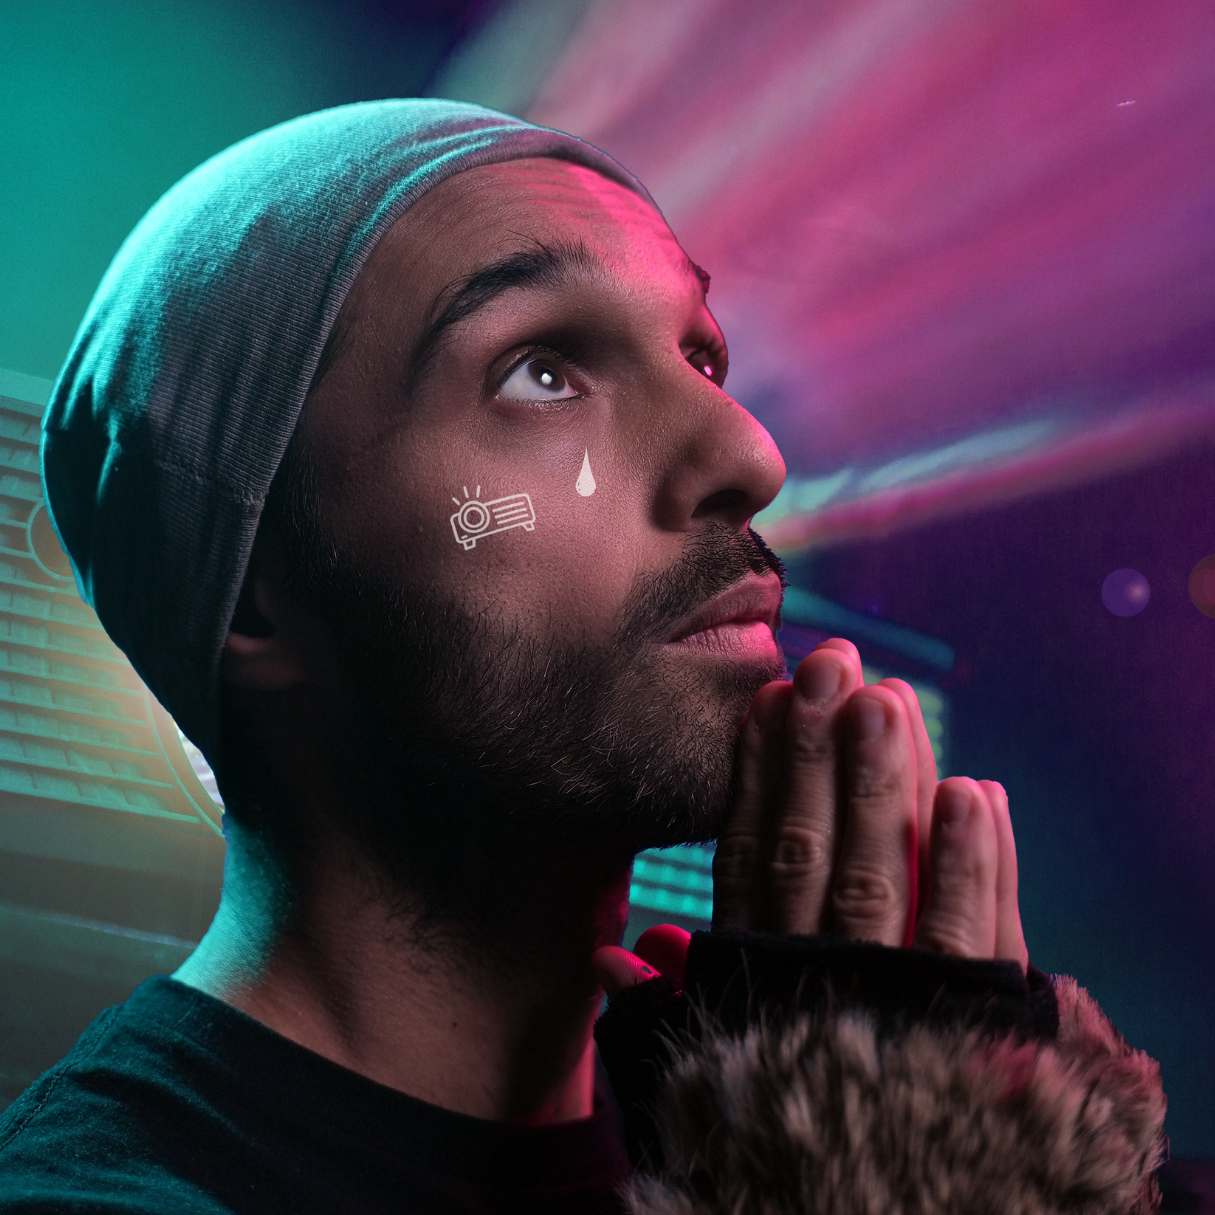 A colourful image of a man looking up at the light in front of projector in prayer.